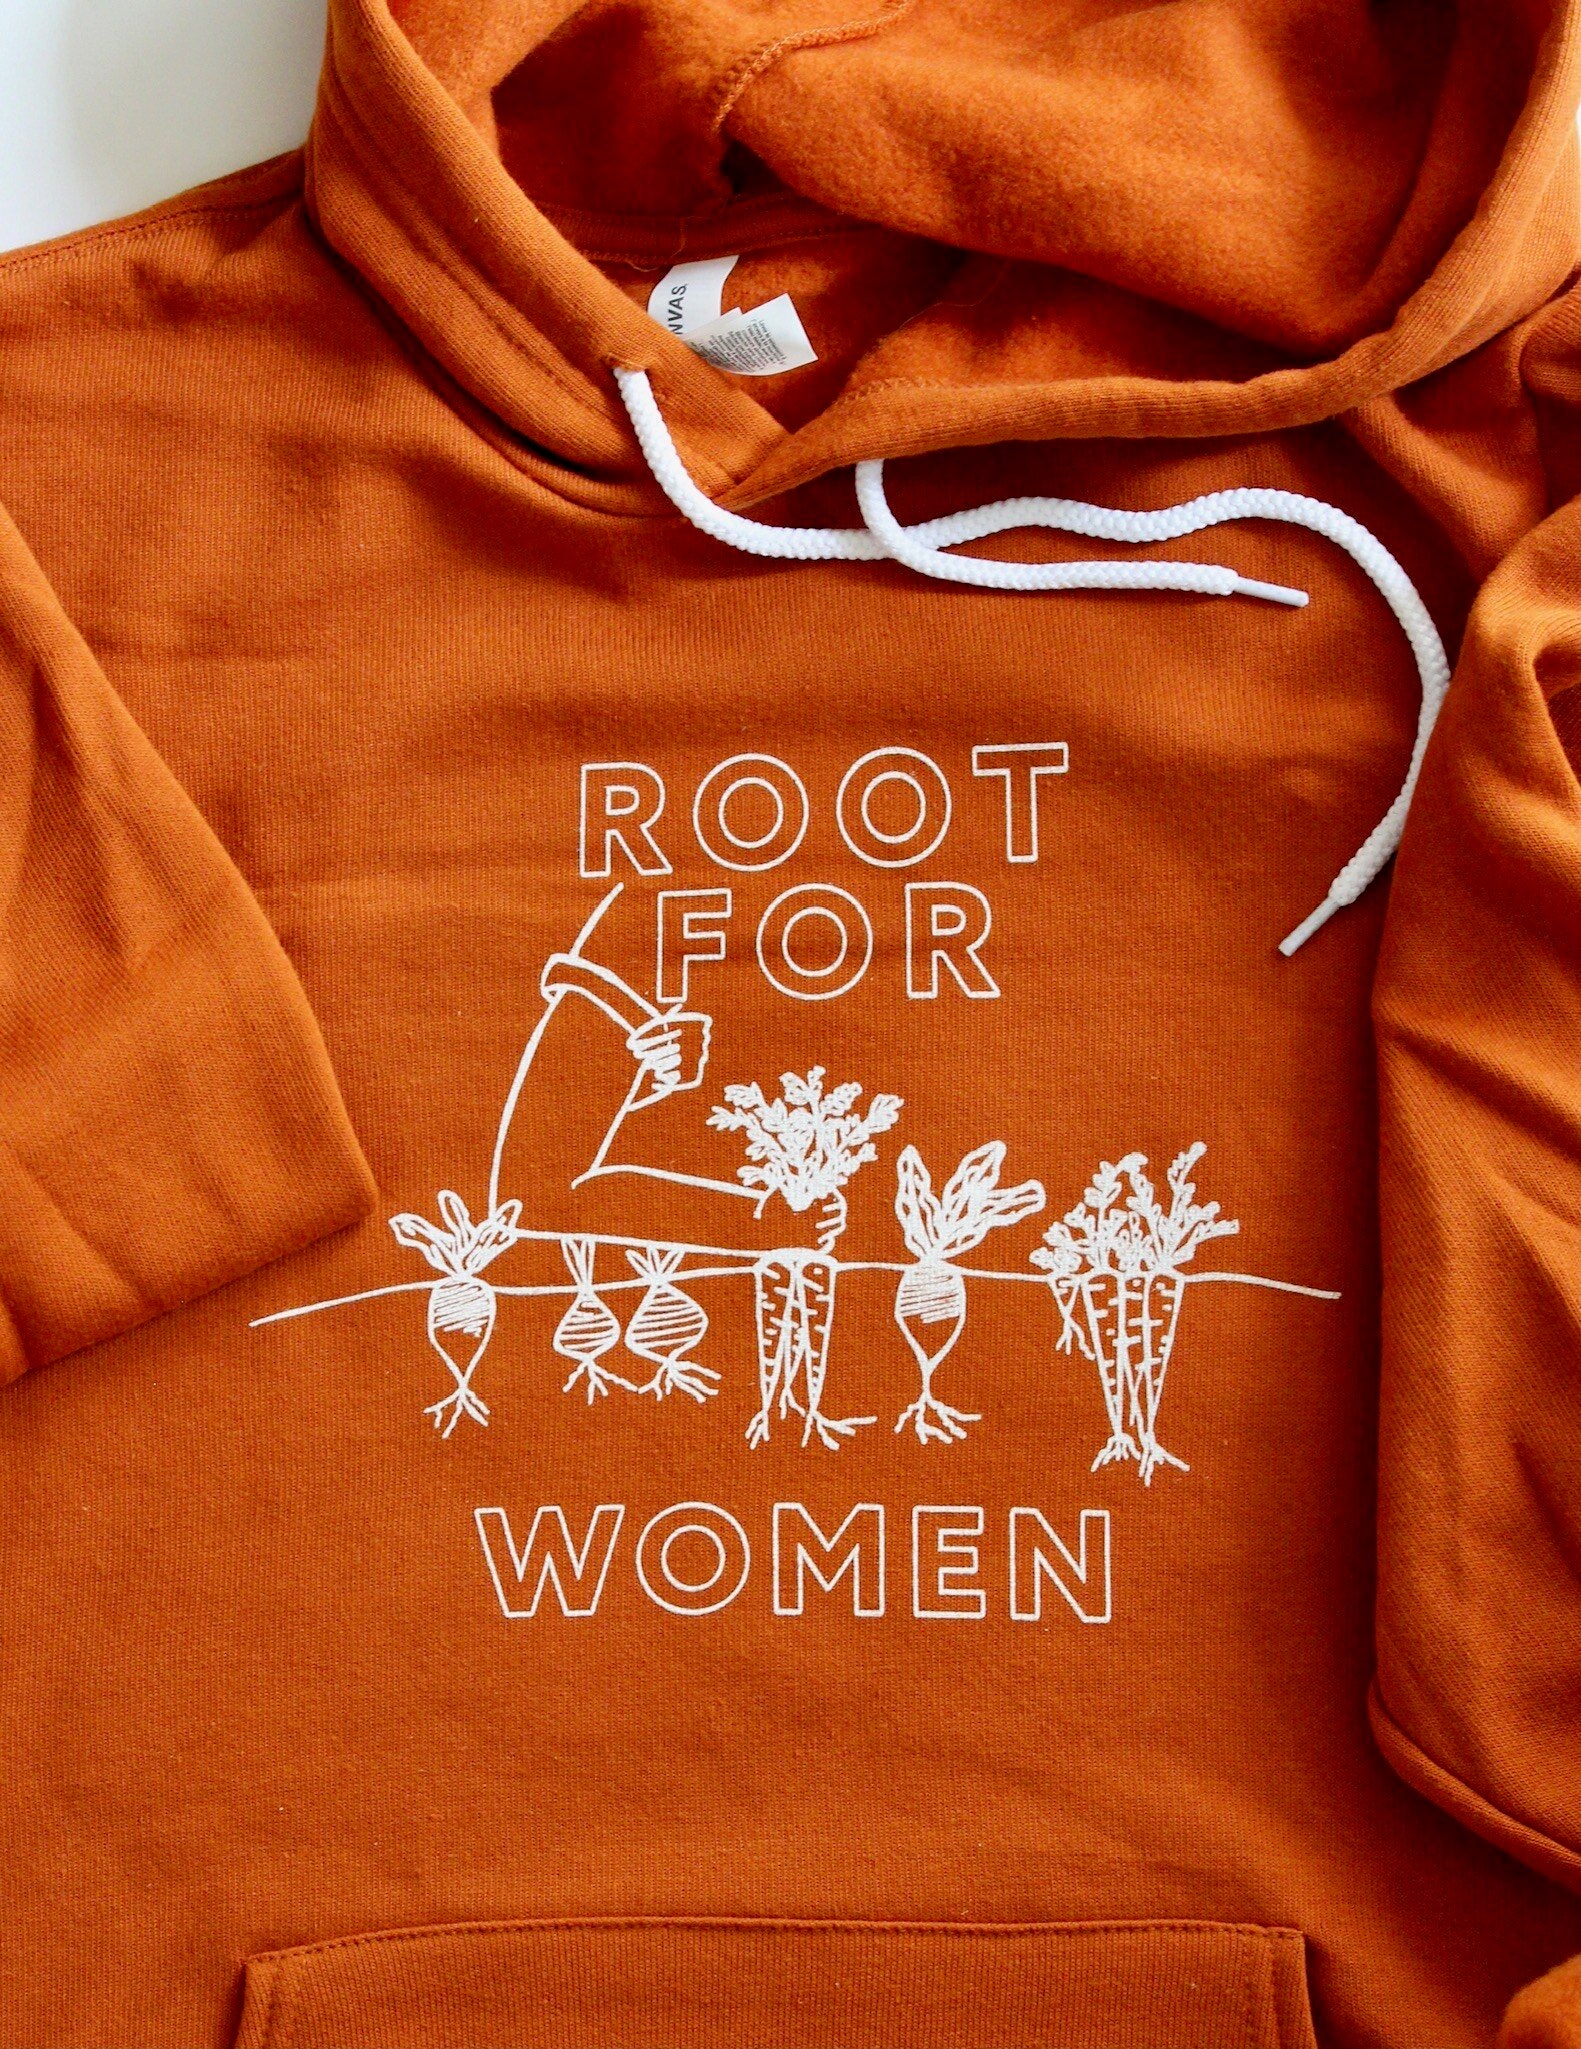 A close up of the "Root for Women" block letters and illustration on an orange hoodie